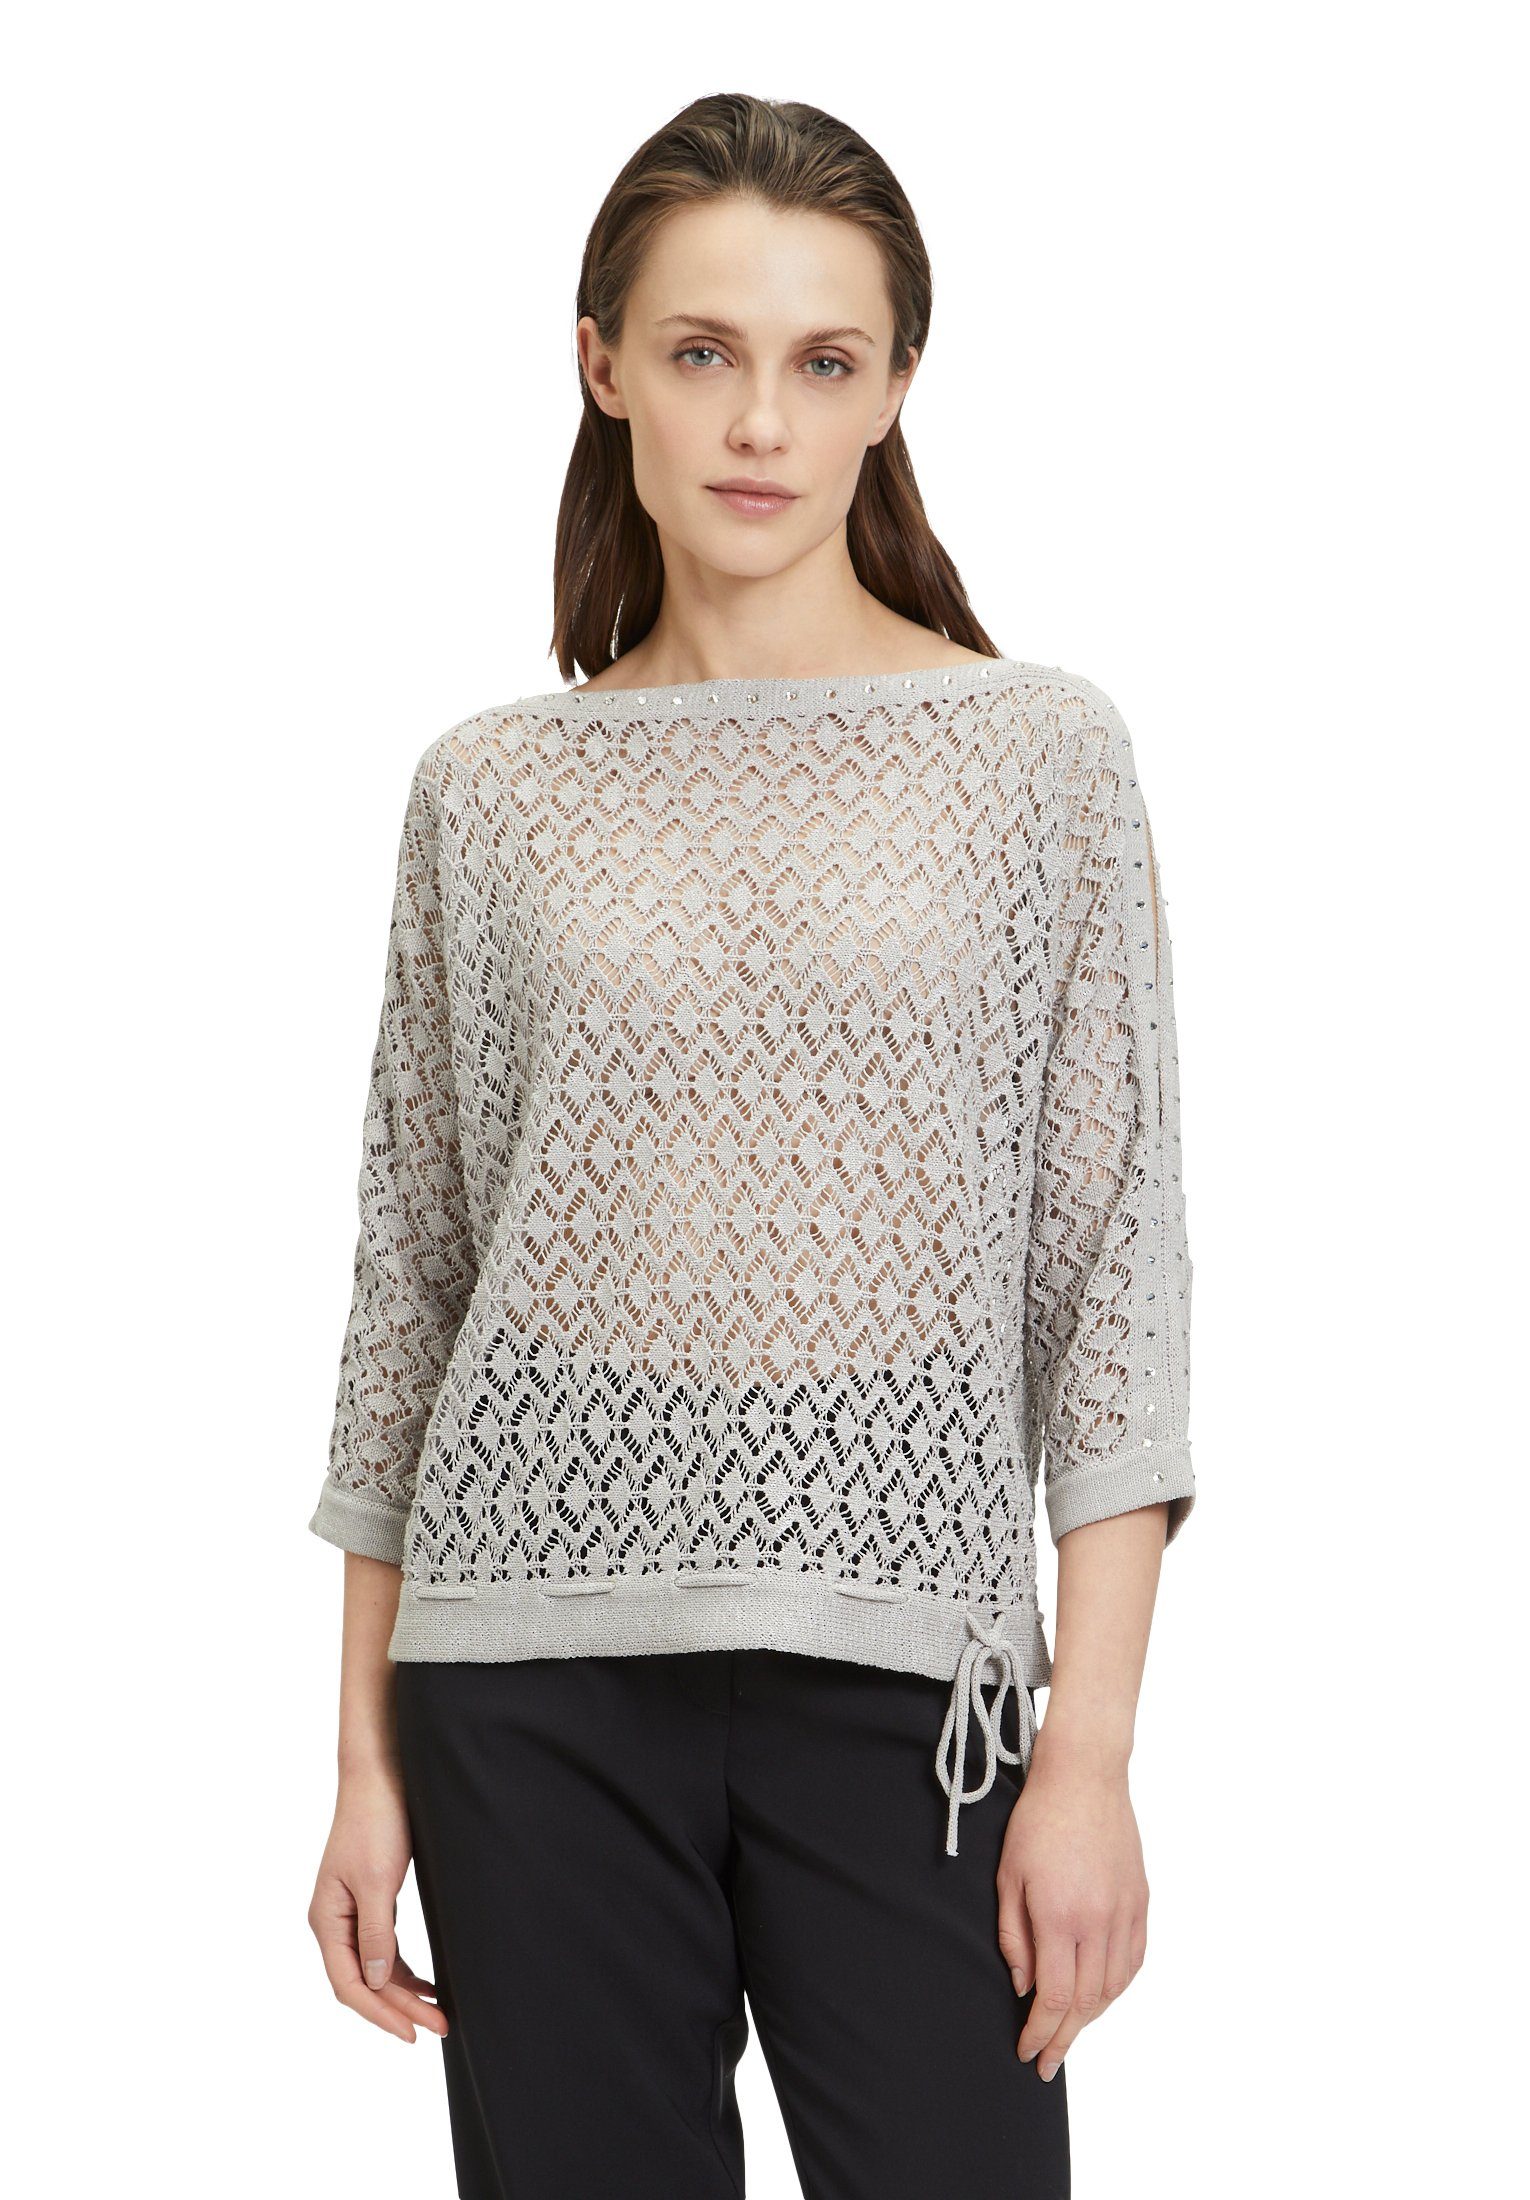 Betty Barclay Strickpullover mit Lochmuster (1-tlg) limited edition